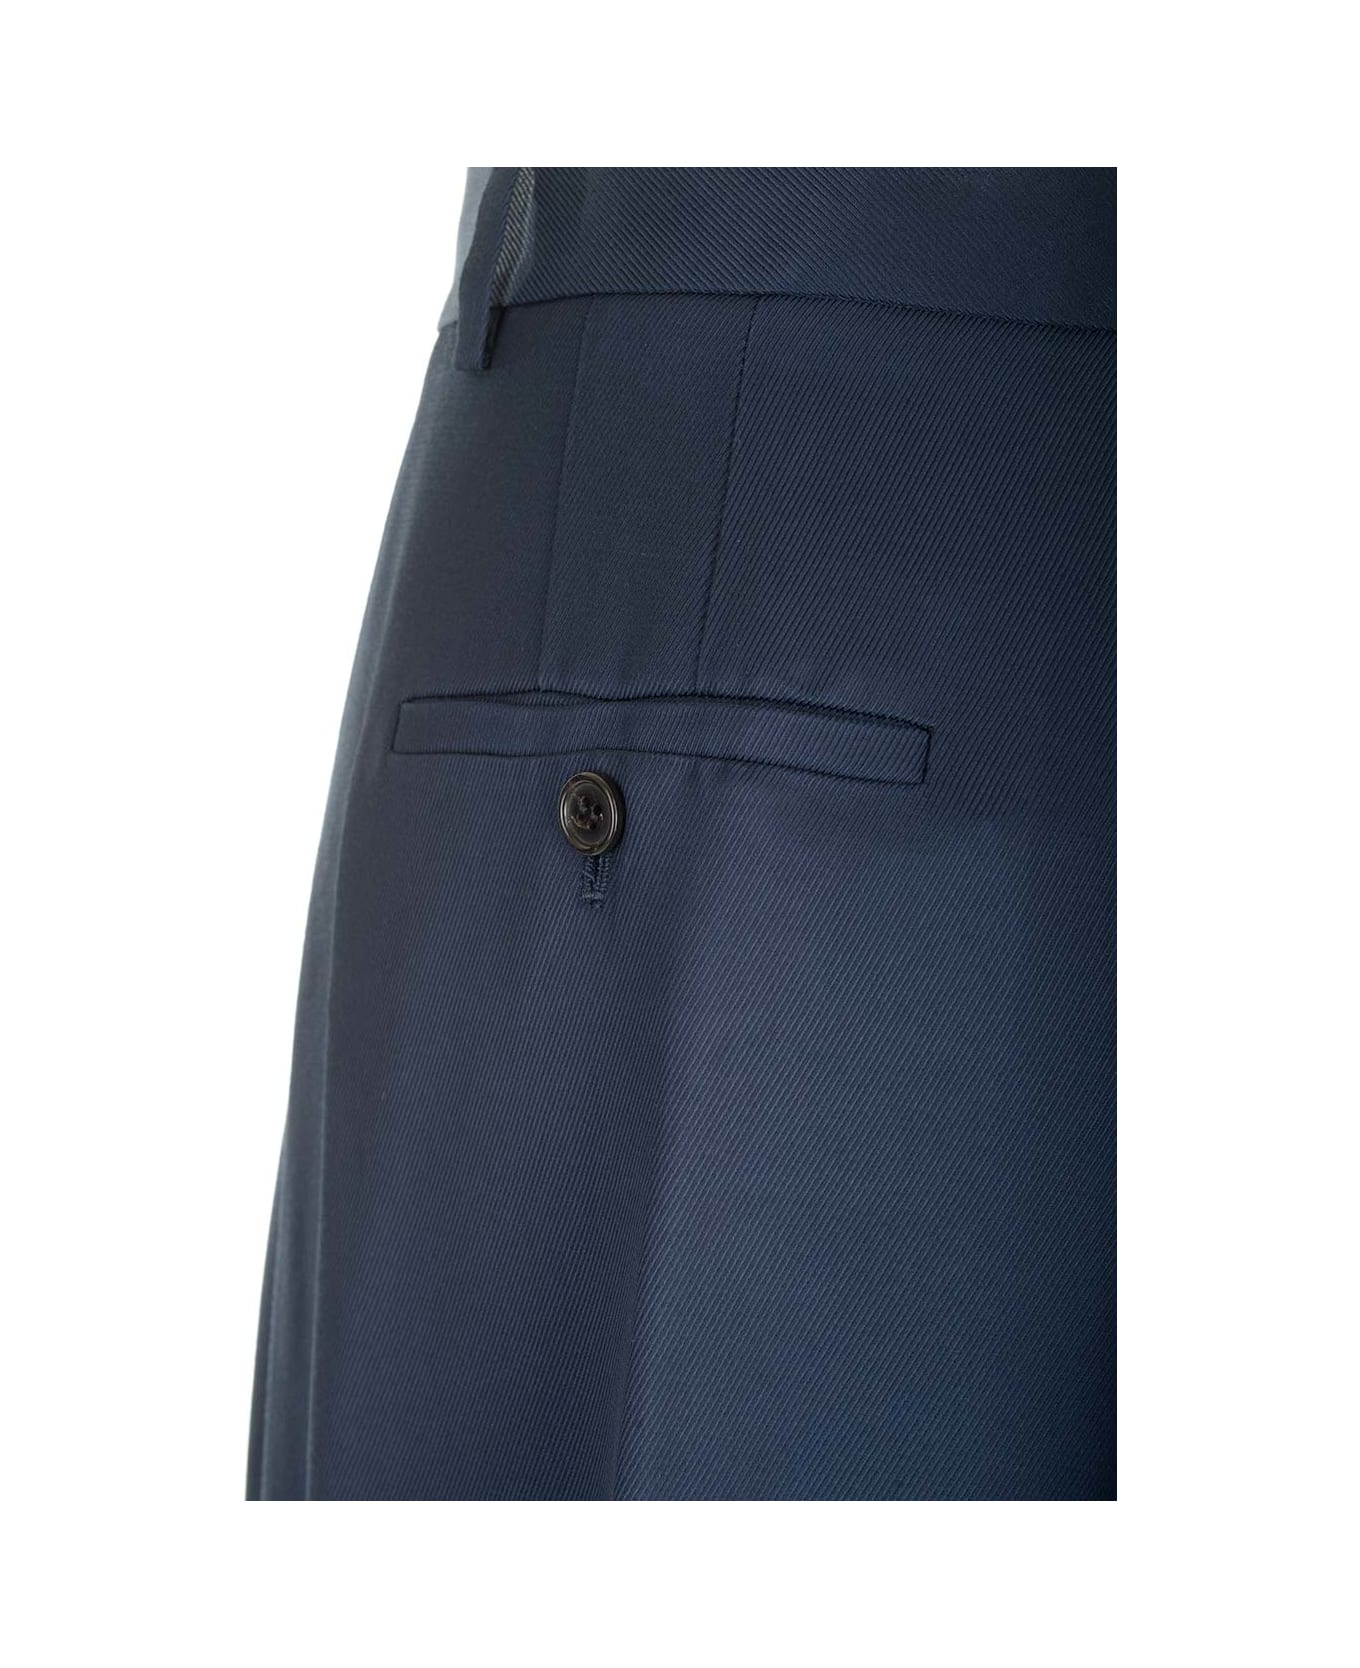 Theory Midnight Blue Satin SPORT Trousers - Xlv Nocturne Navy